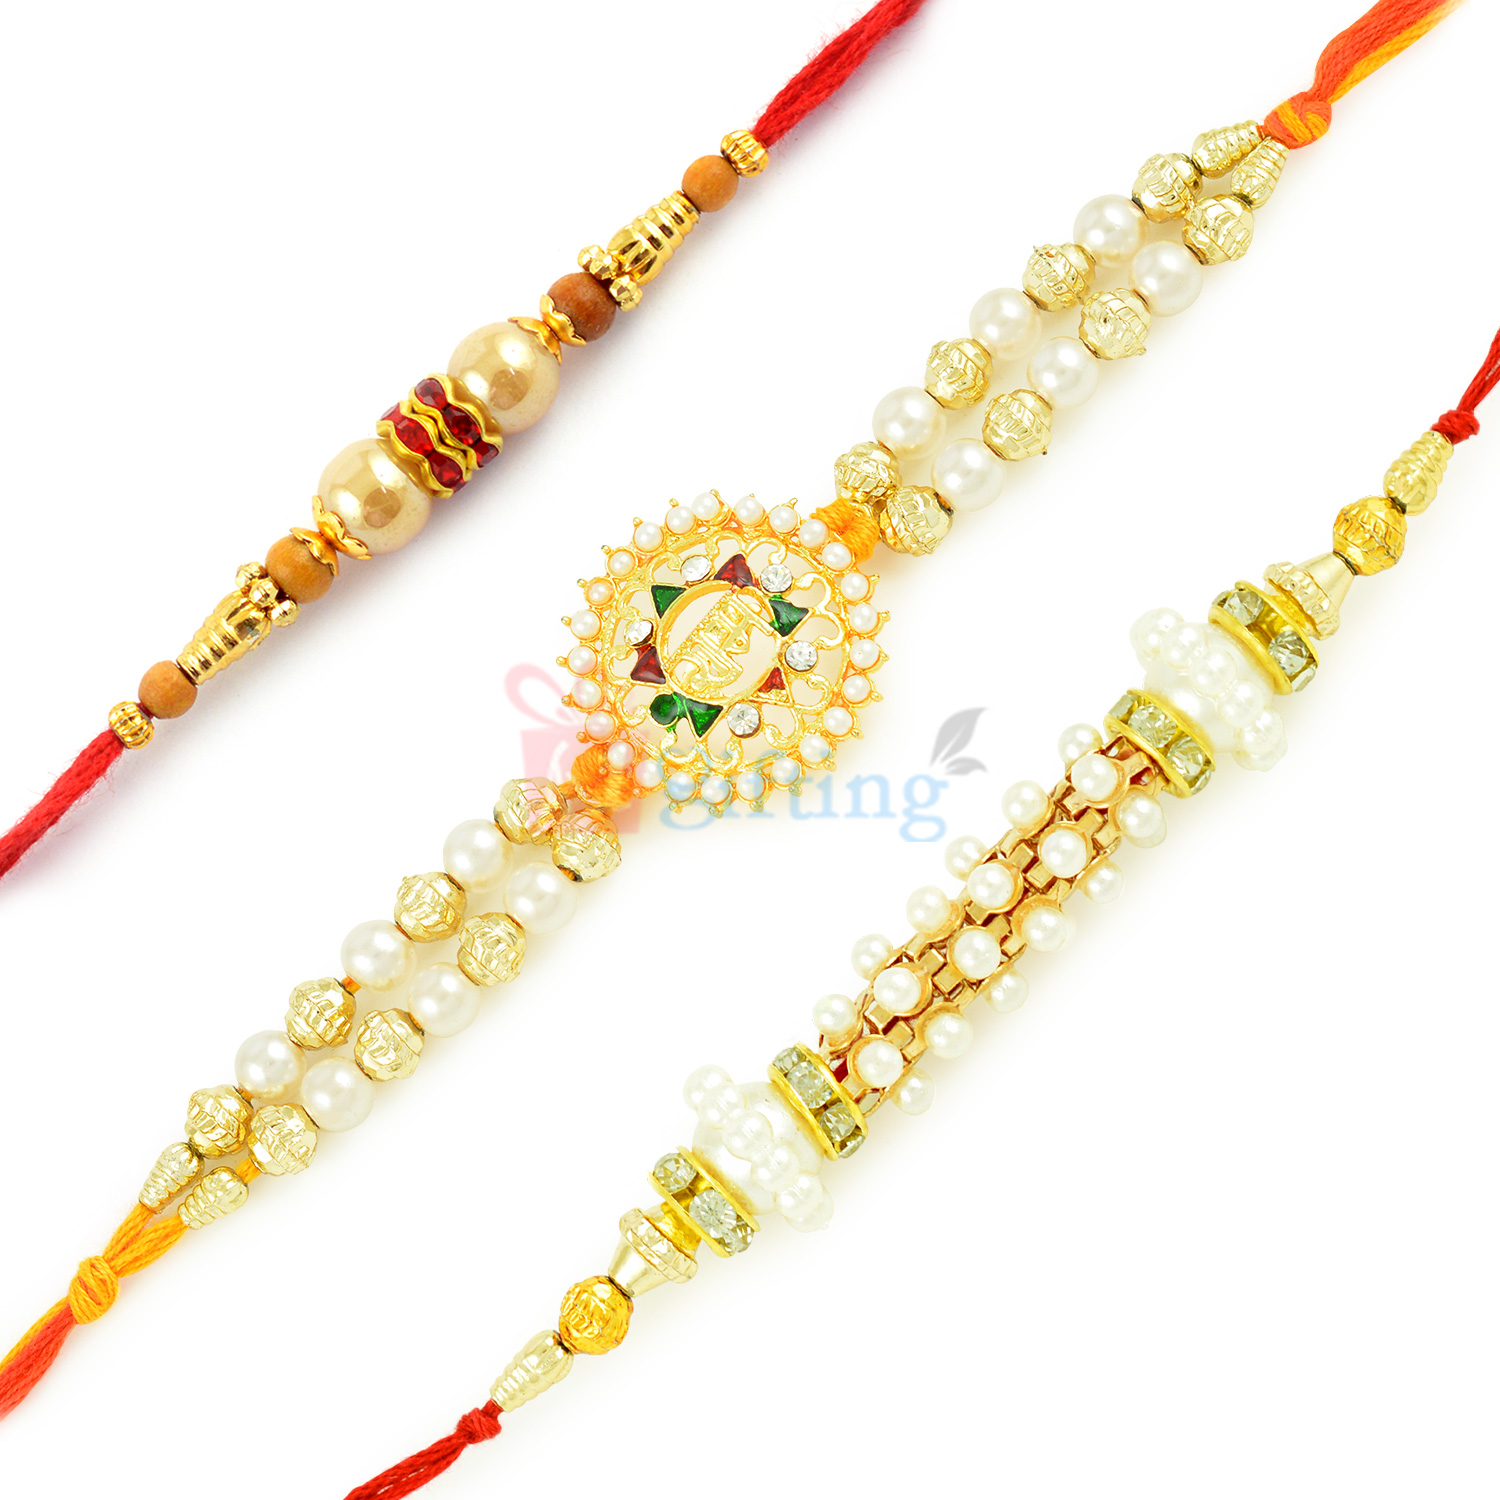 Smartly Selected Pearl and Golden Beads With Ram Rakhi Set